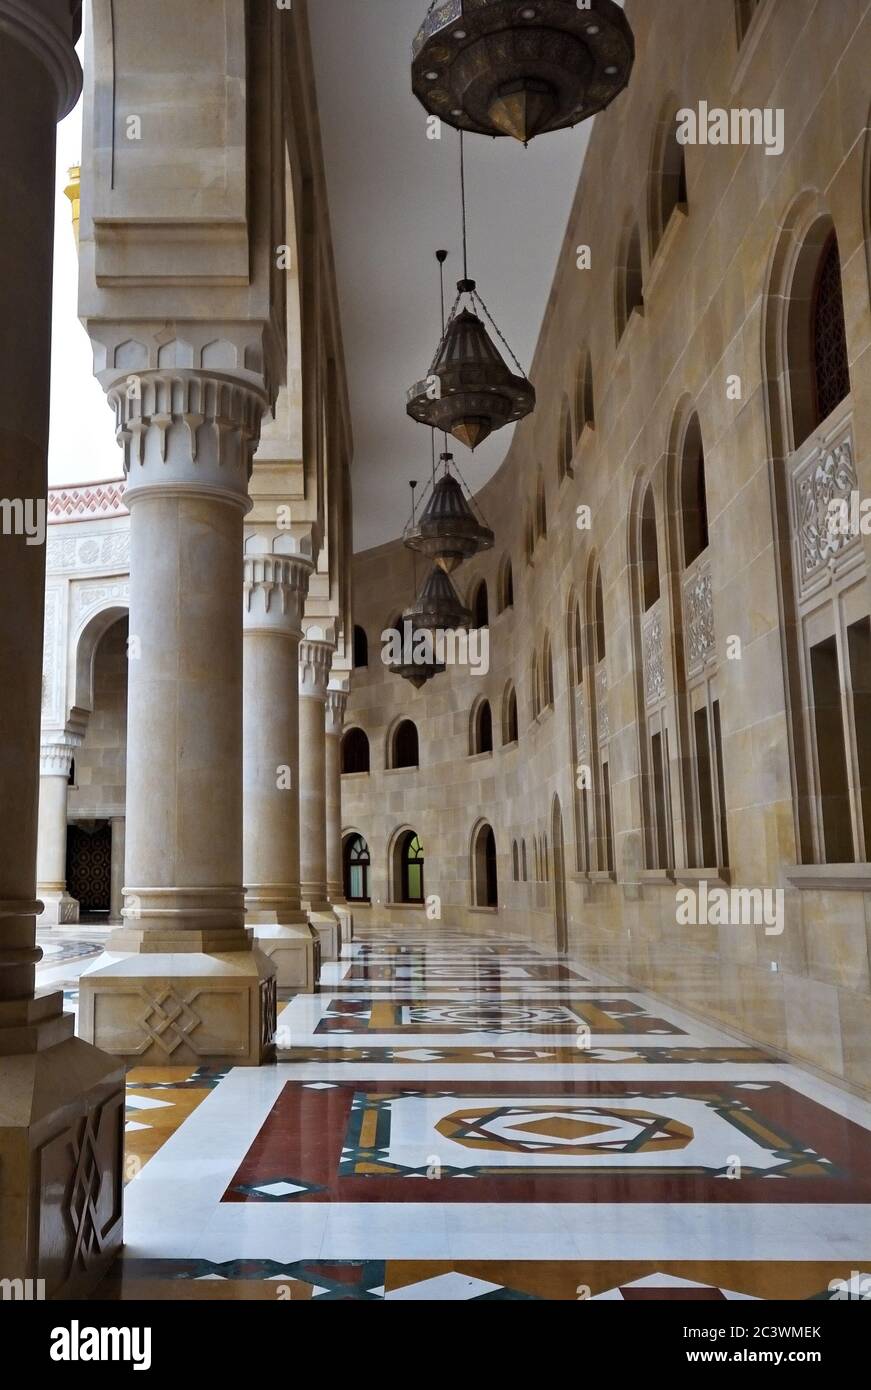 Sanaa, Yemen - March 6, 2010: Courtyard of the famous AL-Saleh mosque in the capital of Yemen. The largest mosque in the country Stock Photo